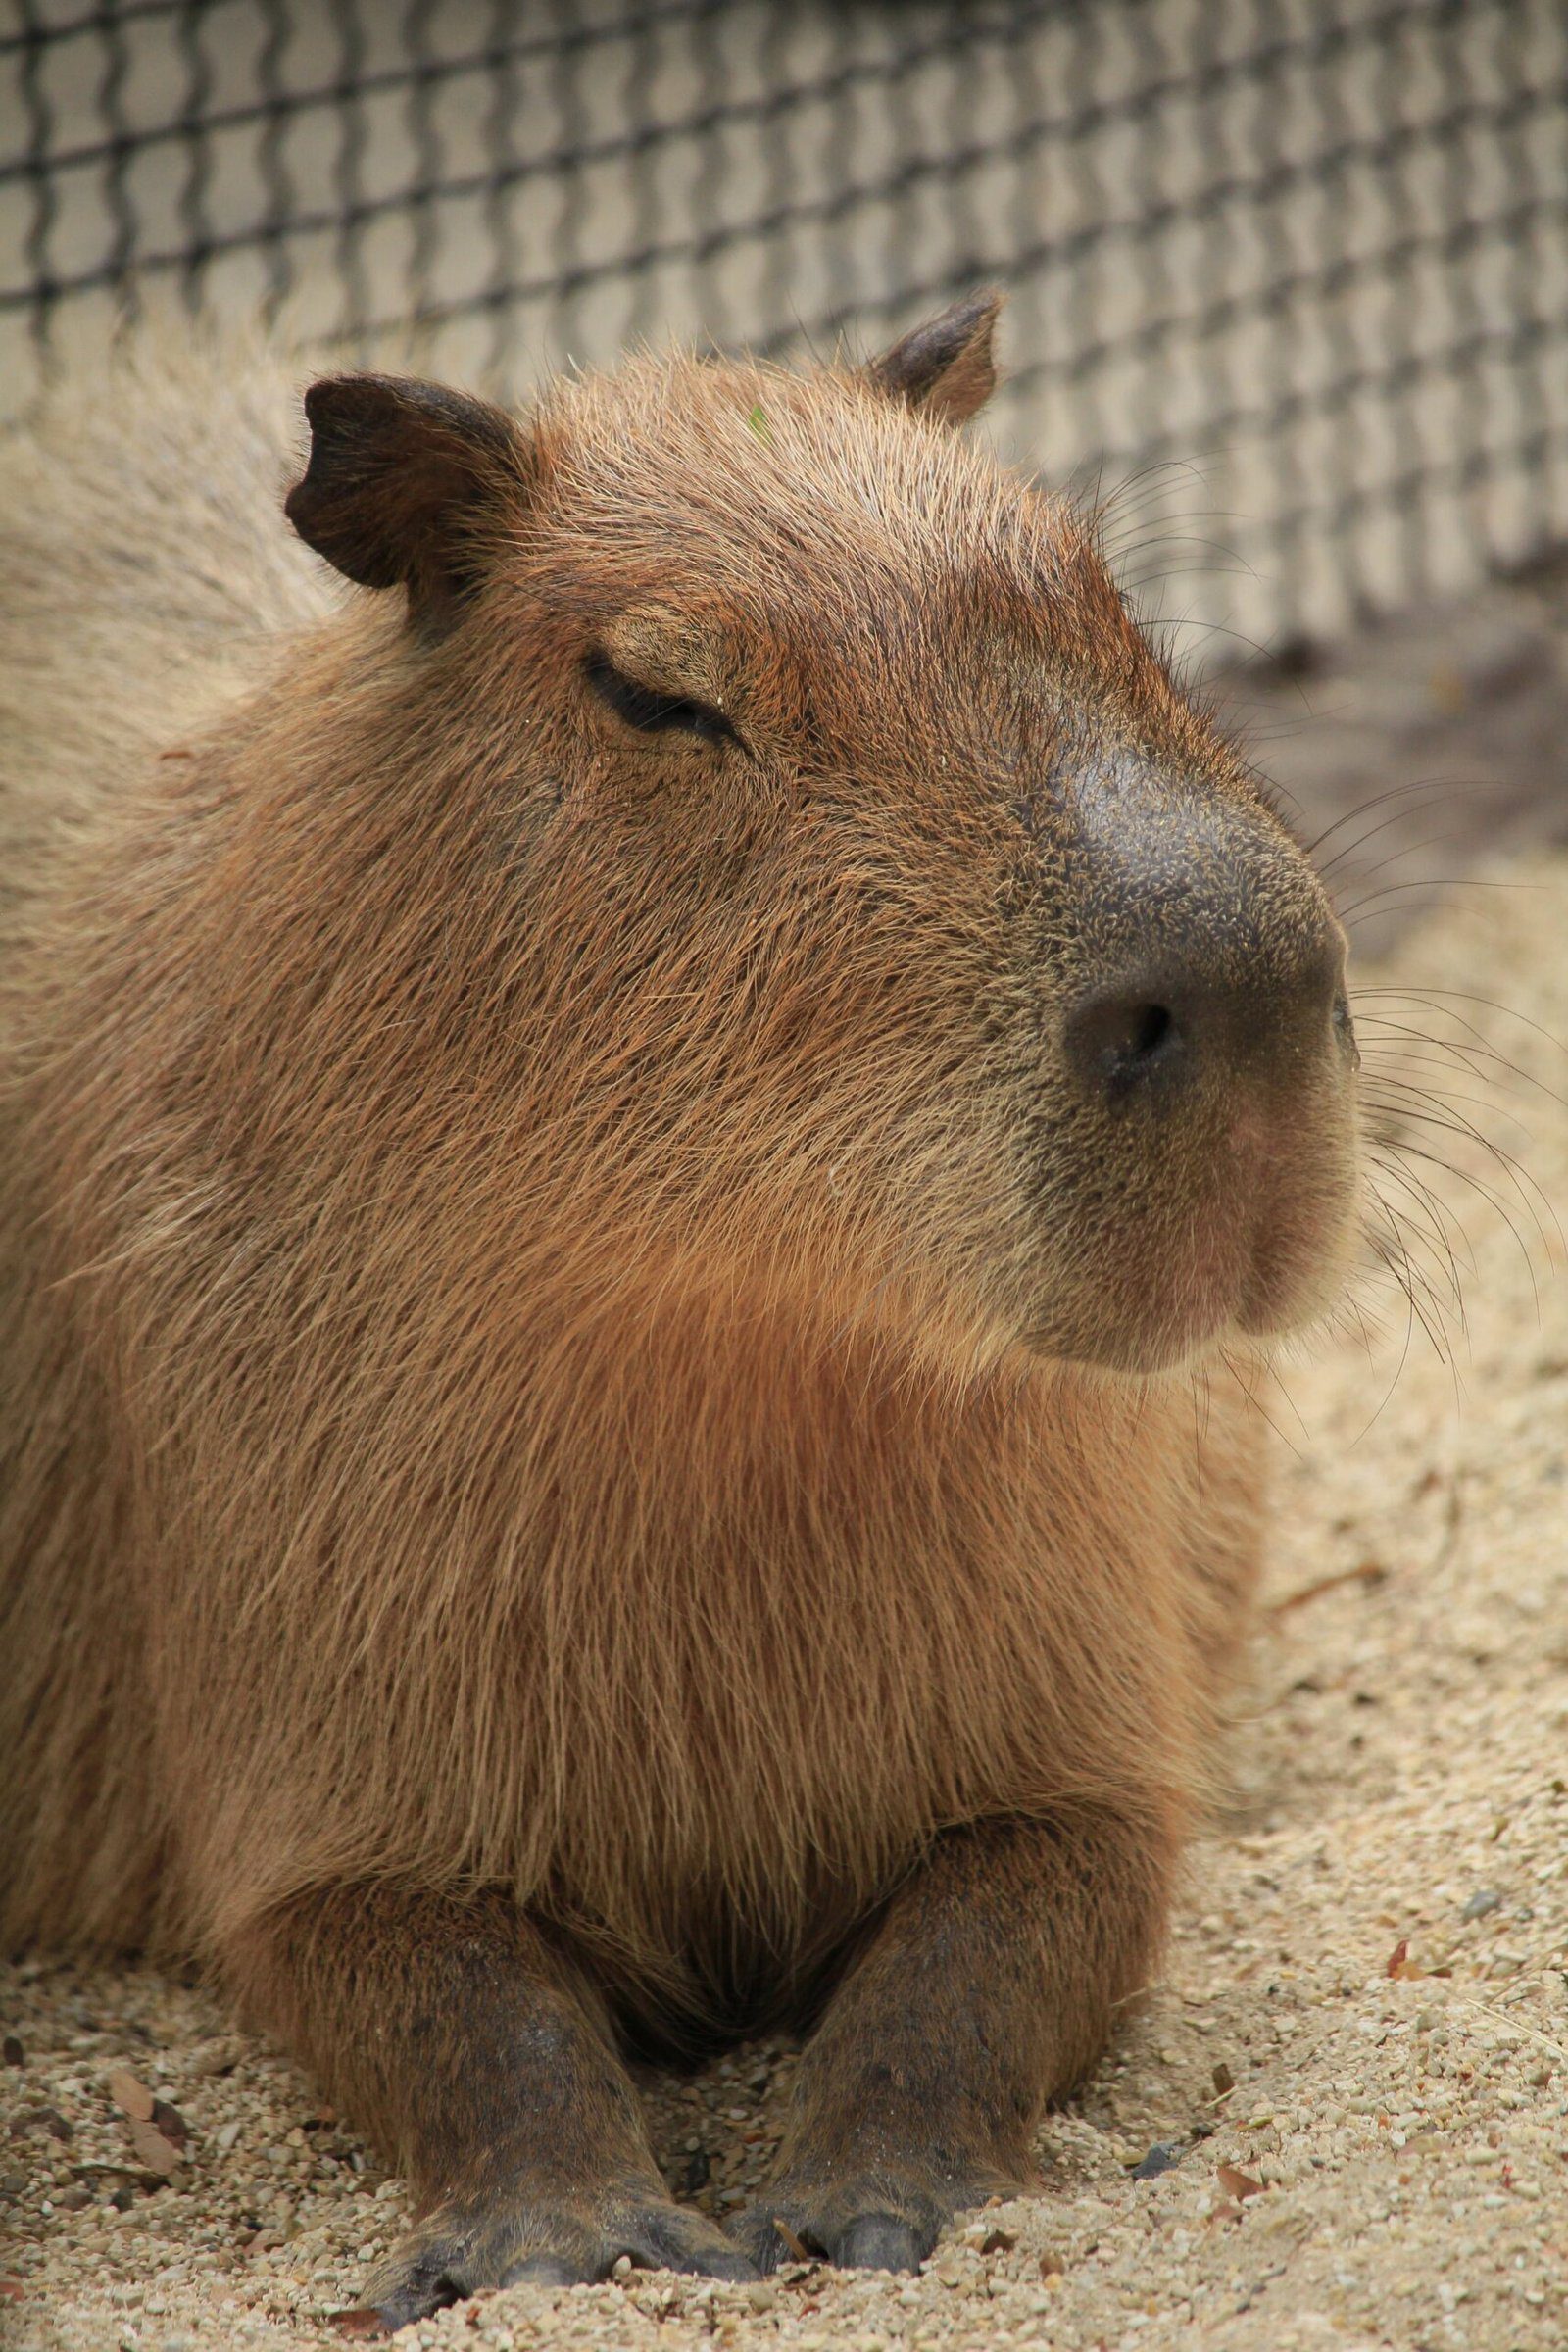 Is it legal to own a capybara as a pet in the UK?